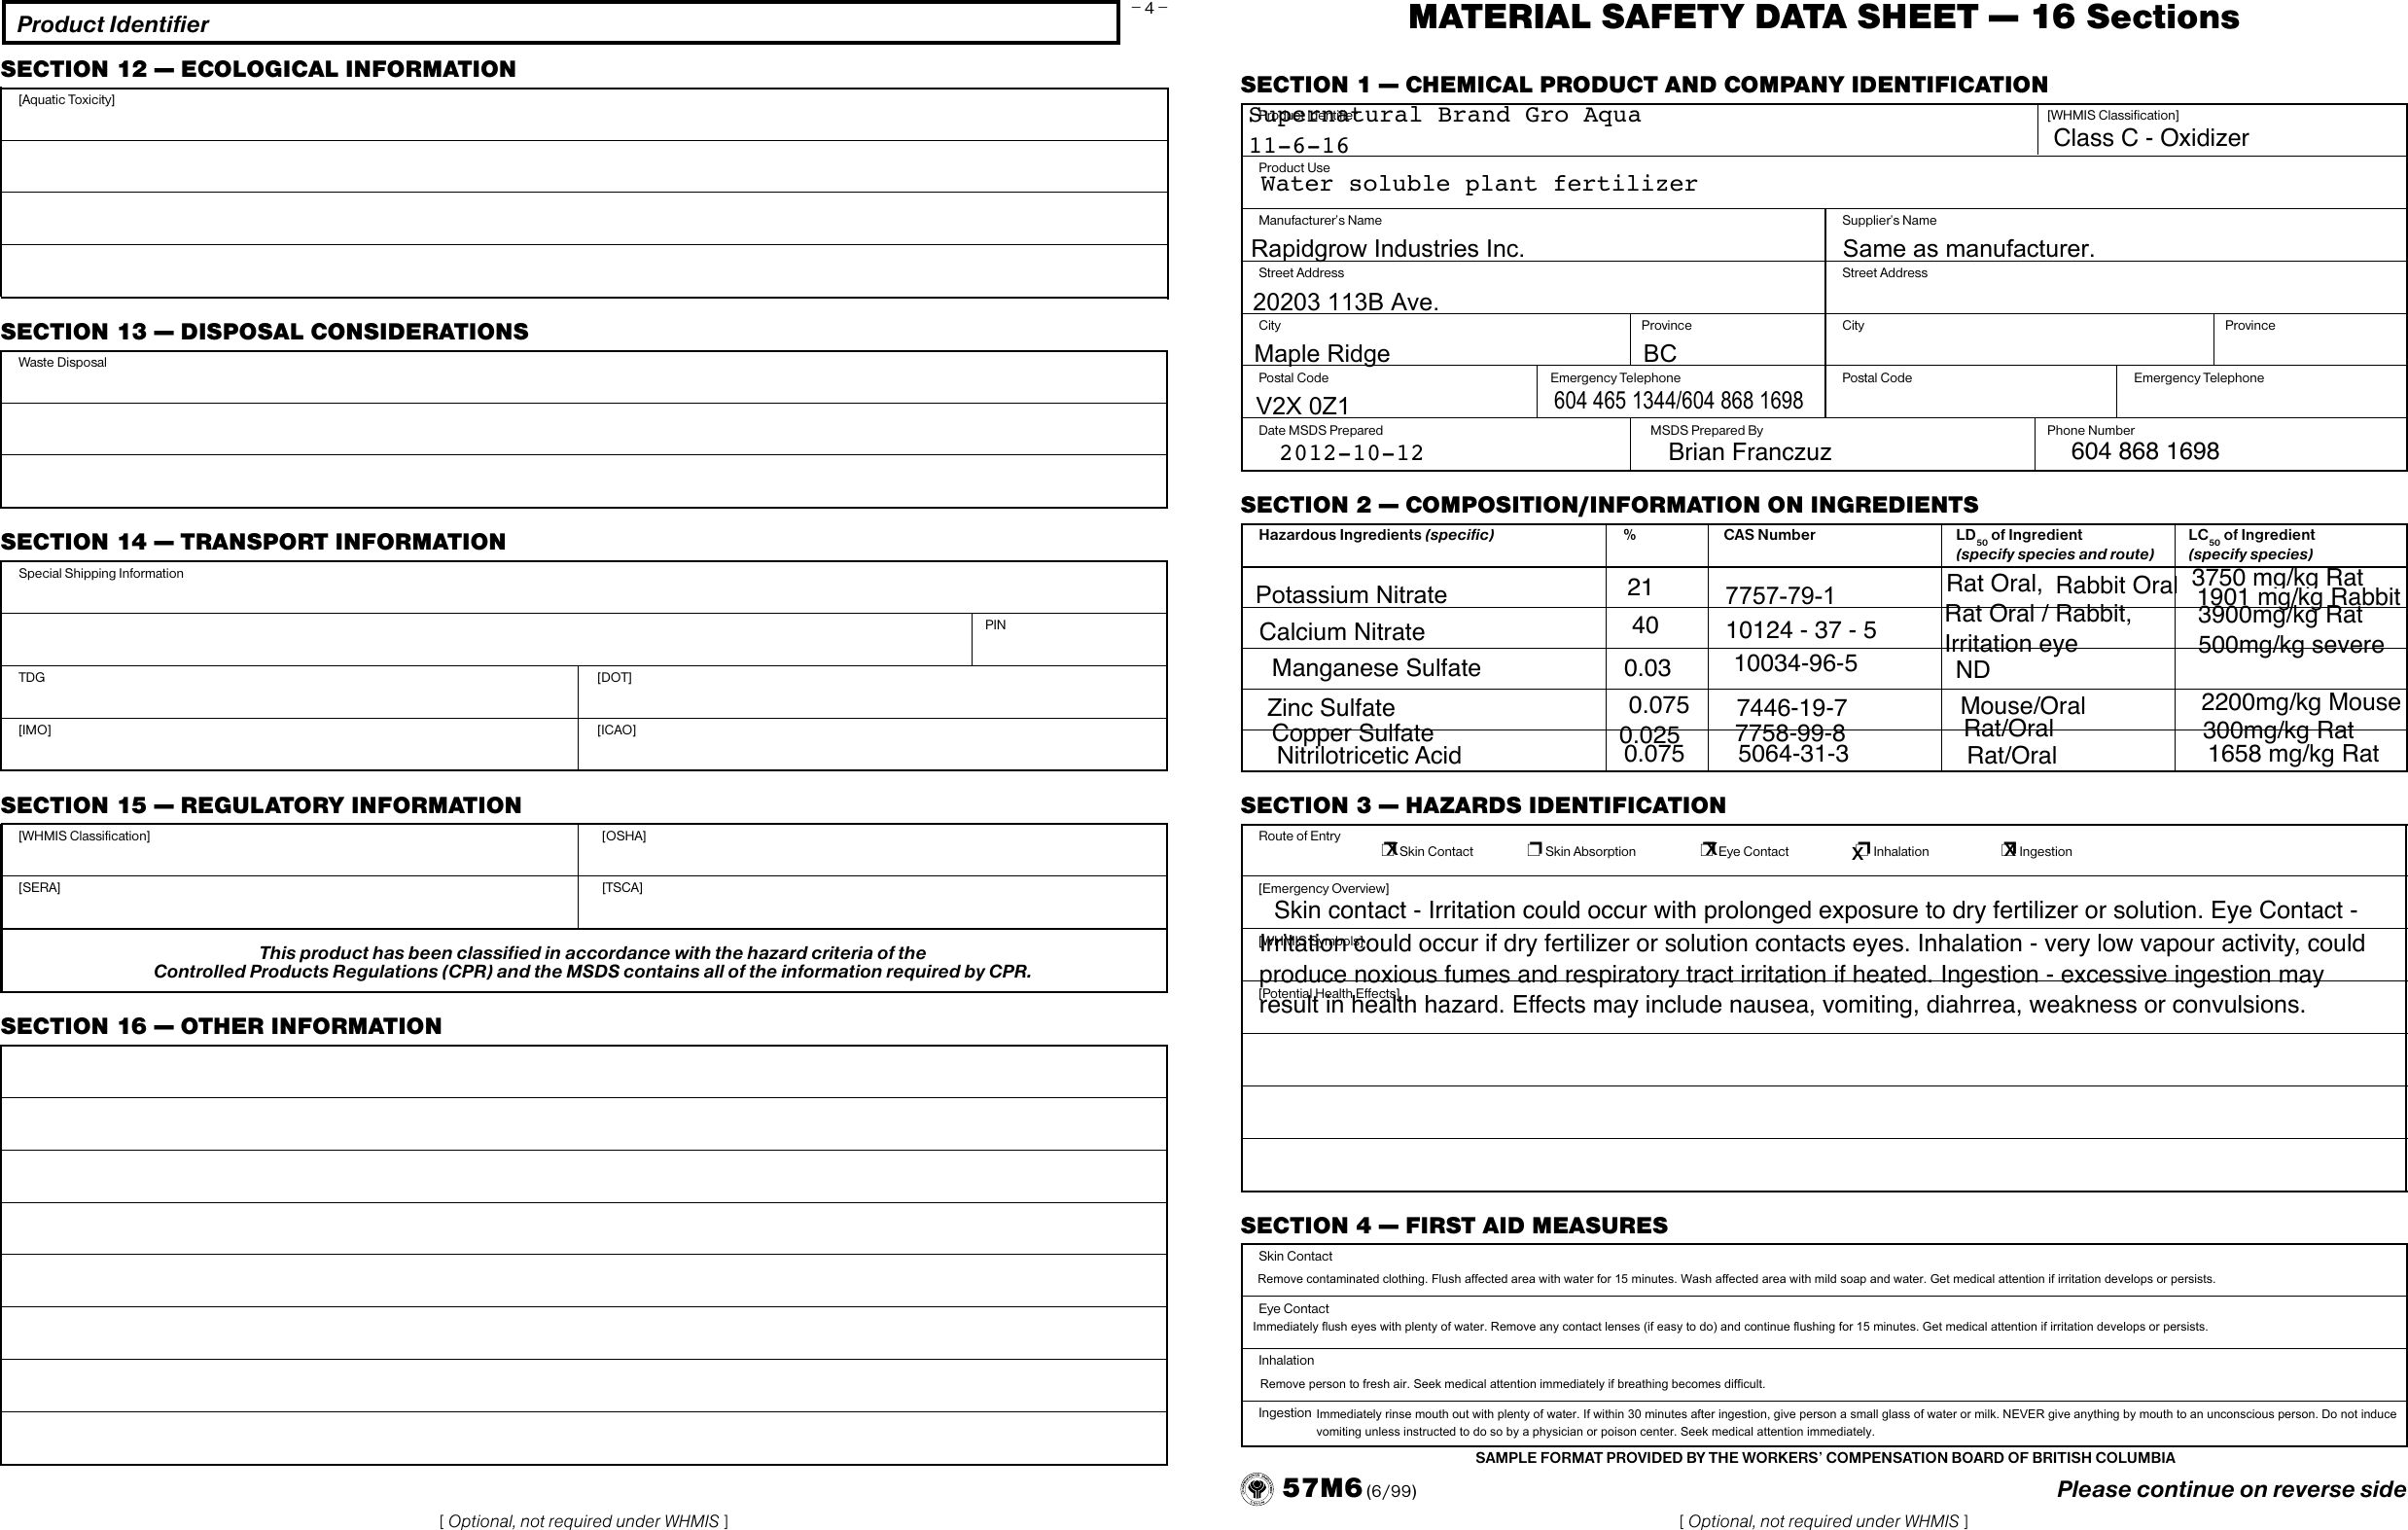 Material Safety Data Sheet Sections Hse Images Videos Gallery